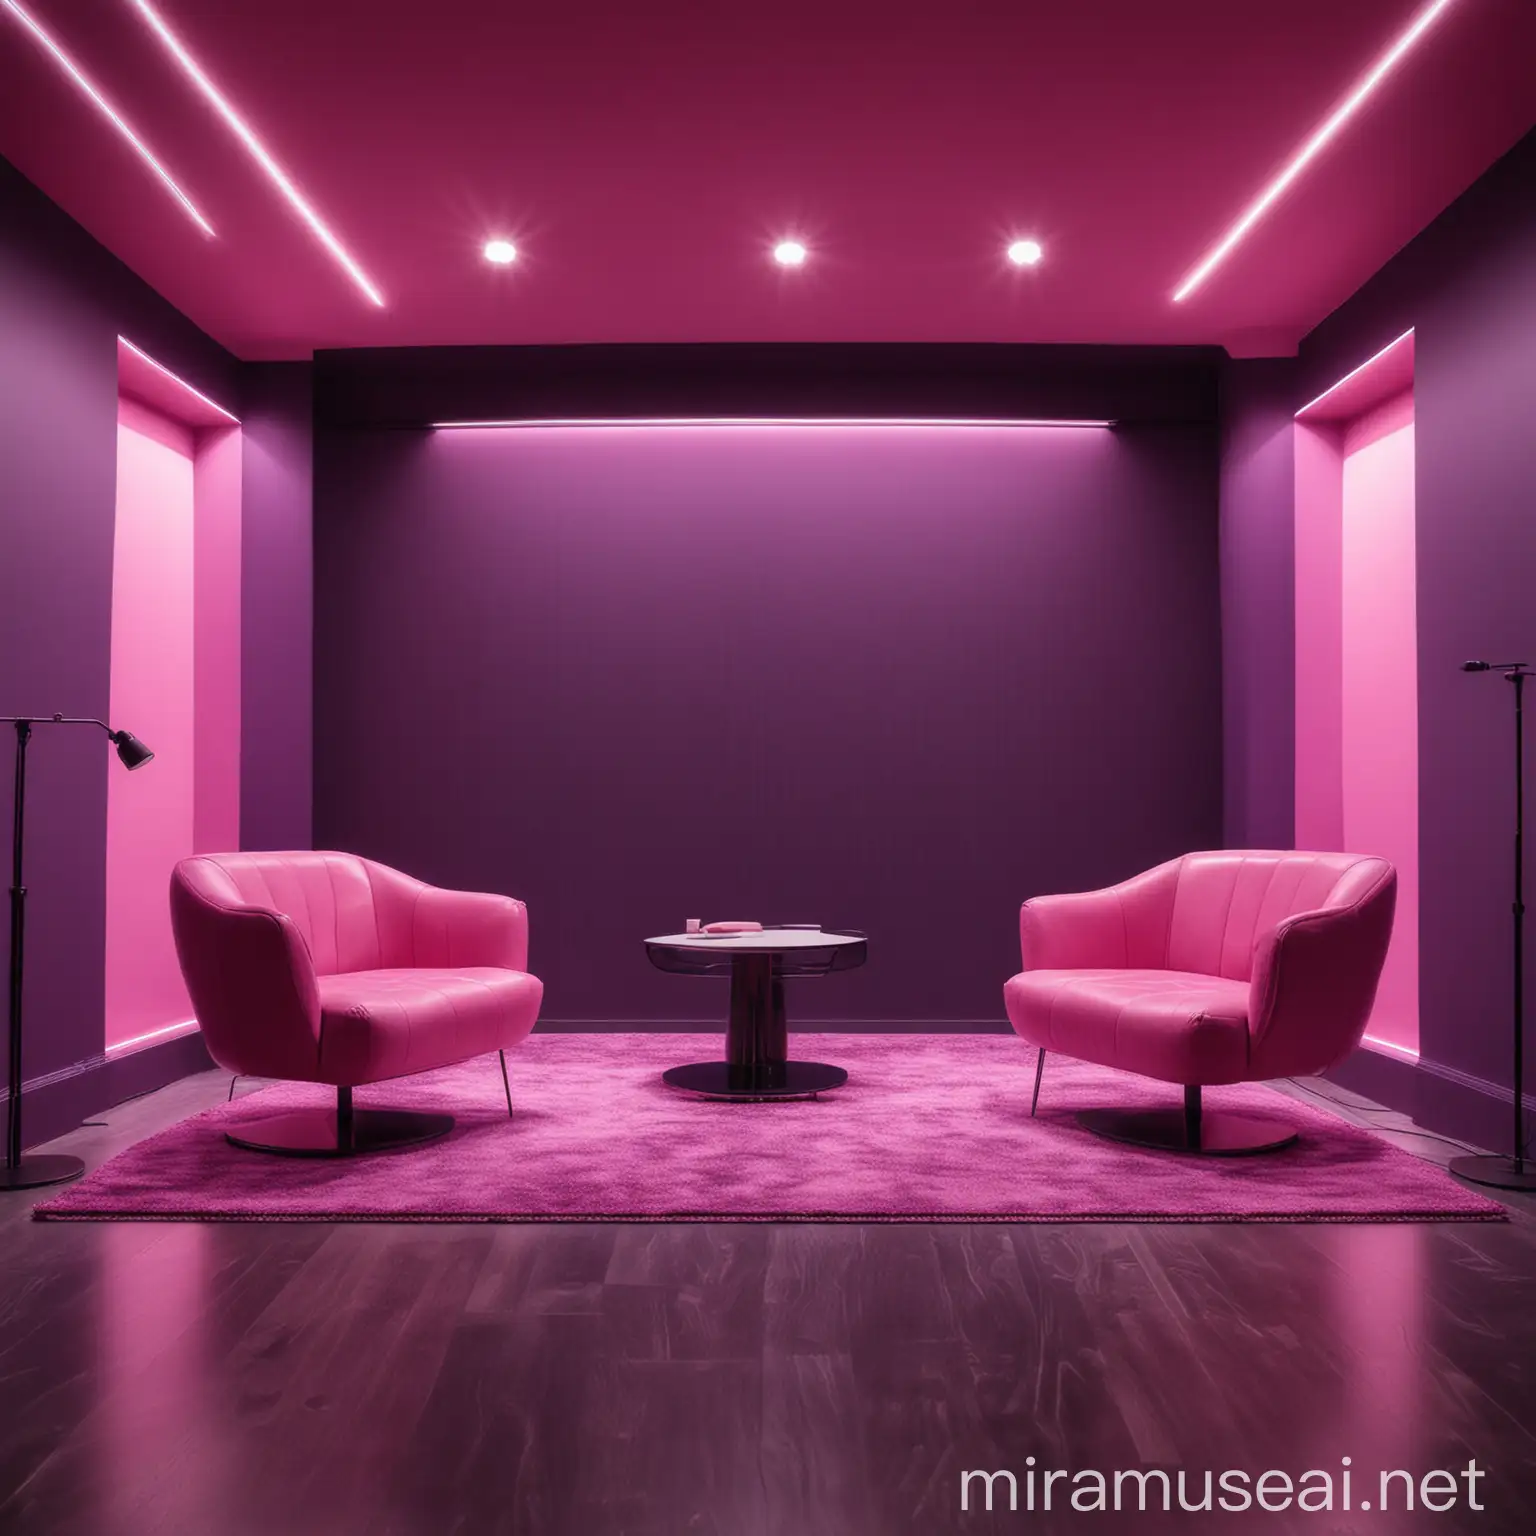 Sleek Furniture Podcast Studio with Vibrant Pink and Purple Glow